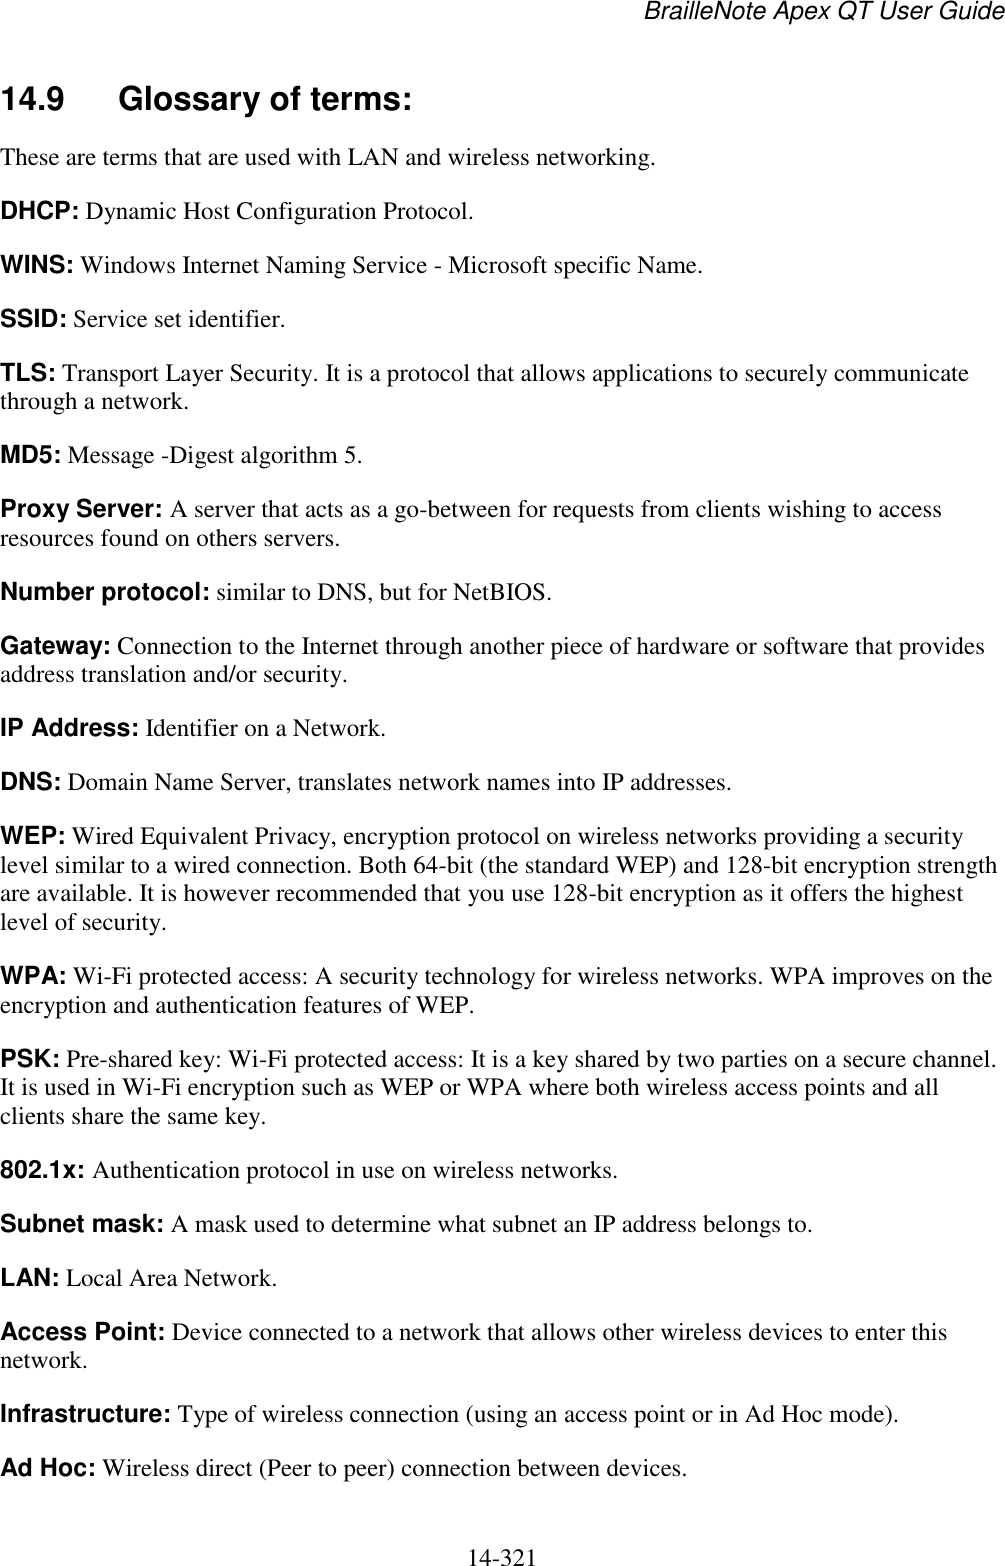 BrailleNote Apex QT User Guide  14-321   14.9  Glossary of terms: These are terms that are used with LAN and wireless networking. DHCP: Dynamic Host Configuration Protocol. WINS: Windows Internet Naming Service - Microsoft specific Name. SSID: Service set identifier.  TLS: Transport Layer Security. It is a protocol that allows applications to securely communicate through a network.  MD5: Message -Digest algorithm 5.  Proxy Server: A server that acts as a go-between for requests from clients wishing to access resources found on others servers.  Number protocol: similar to DNS, but for NetBIOS. Gateway: Connection to the Internet through another piece of hardware or software that provides address translation and/or security. IP Address: Identifier on a Network. DNS: Domain Name Server, translates network names into IP addresses. WEP: Wired Equivalent Privacy, encryption protocol on wireless networks providing a security level similar to a wired connection. Both 64-bit (the standard WEP) and 128-bit encryption strength are available. It is however recommended that you use 128-bit encryption as it offers the highest level of security.  WPA: Wi-Fi protected access: A security technology for wireless networks. WPA improves on the encryption and authentication features of WEP.  PSK: Pre-shared key: Wi-Fi protected access: It is a key shared by two parties on a secure channel. It is used in Wi-Fi encryption such as WEP or WPA where both wireless access points and all clients share the same key.  802.1x: Authentication protocol in use on wireless networks. Subnet mask: A mask used to determine what subnet an IP address belongs to. LAN: Local Area Network. Access Point: Device connected to a network that allows other wireless devices to enter this network. Infrastructure: Type of wireless connection (using an access point or in Ad Hoc mode). Ad Hoc: Wireless direct (Peer to peer) connection between devices. 